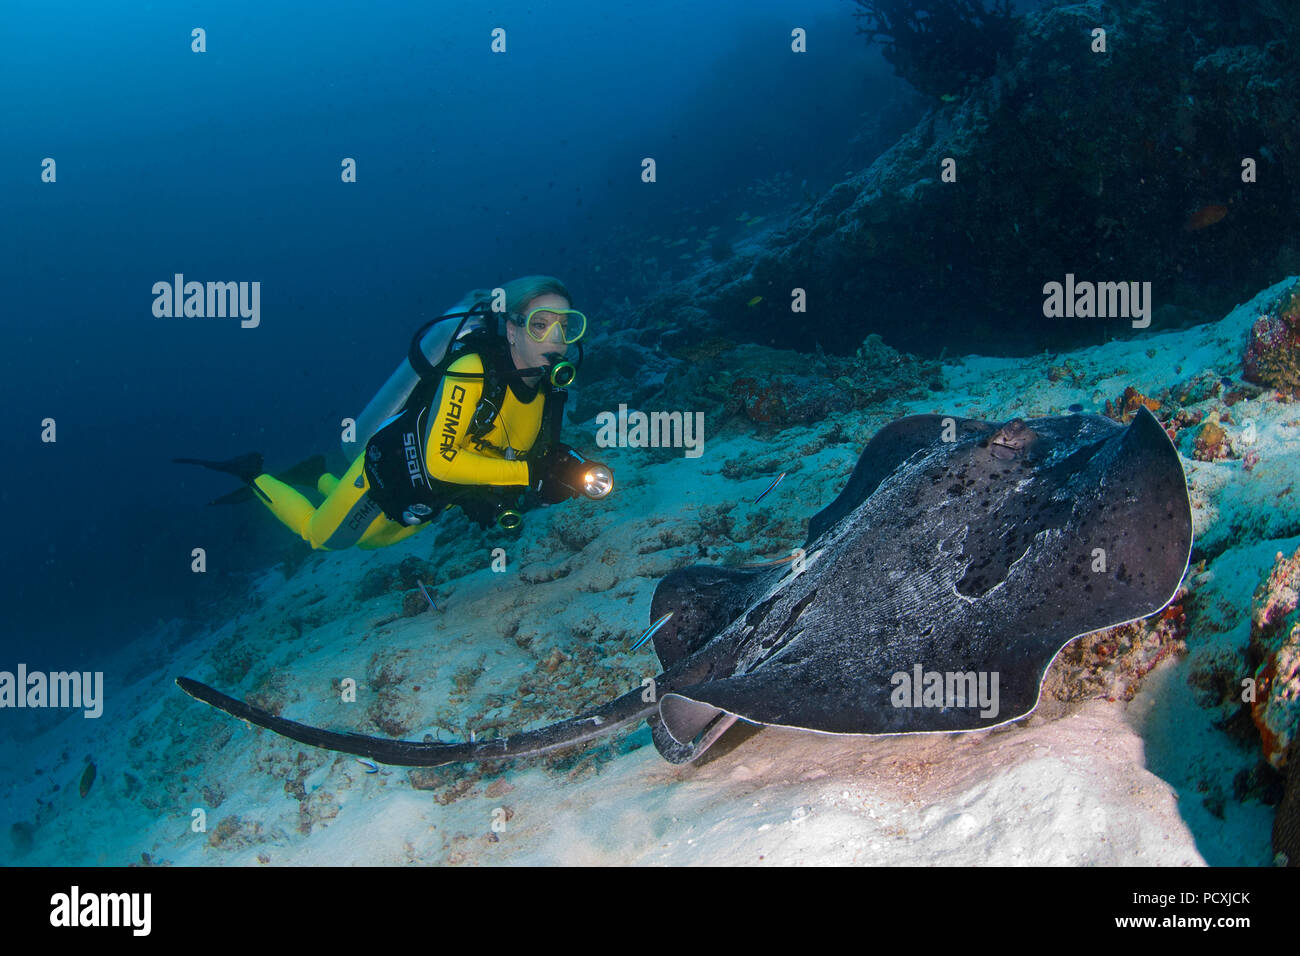 Scuba diver and Round ribbontail ray or Marbled stingray (Taeniura meyeni), Cocos island, Costa Rica Stock Photo